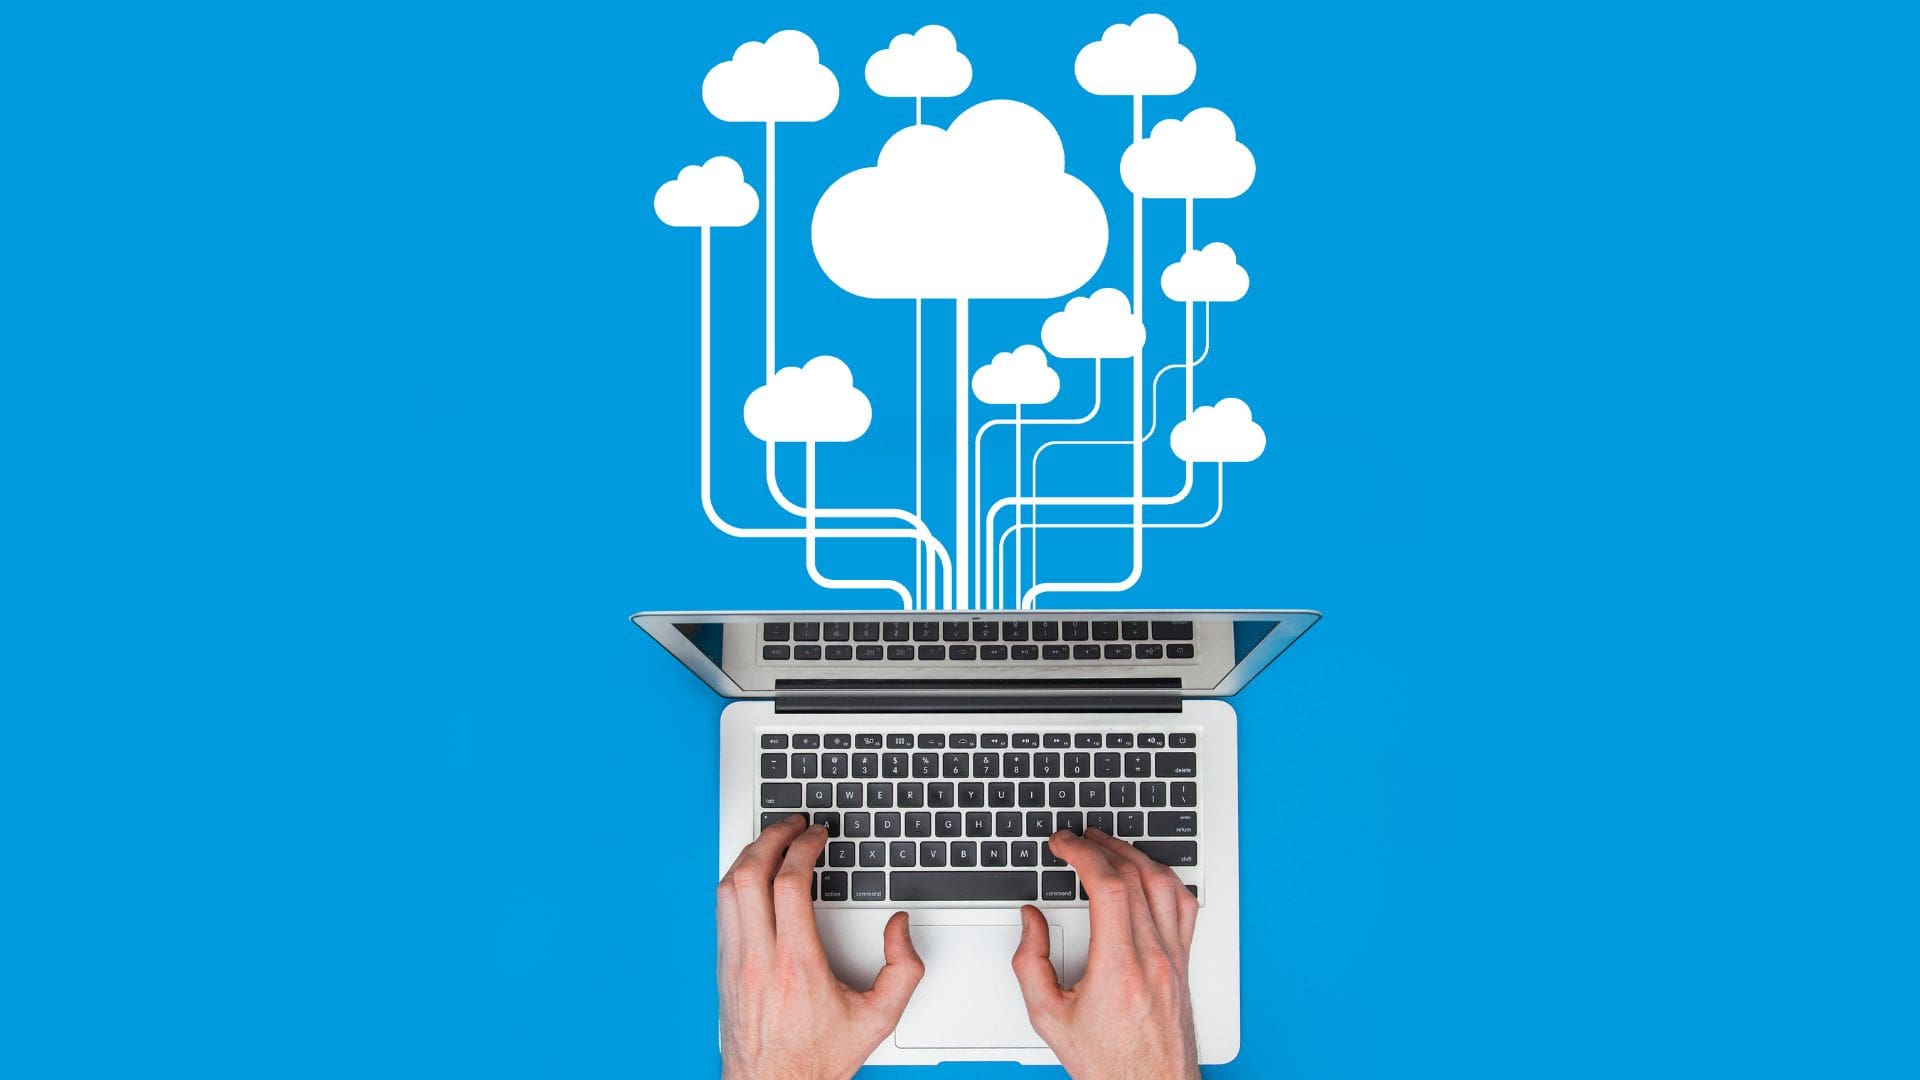 How have cloud services revolutionized business operations, and what benefits do they offer?